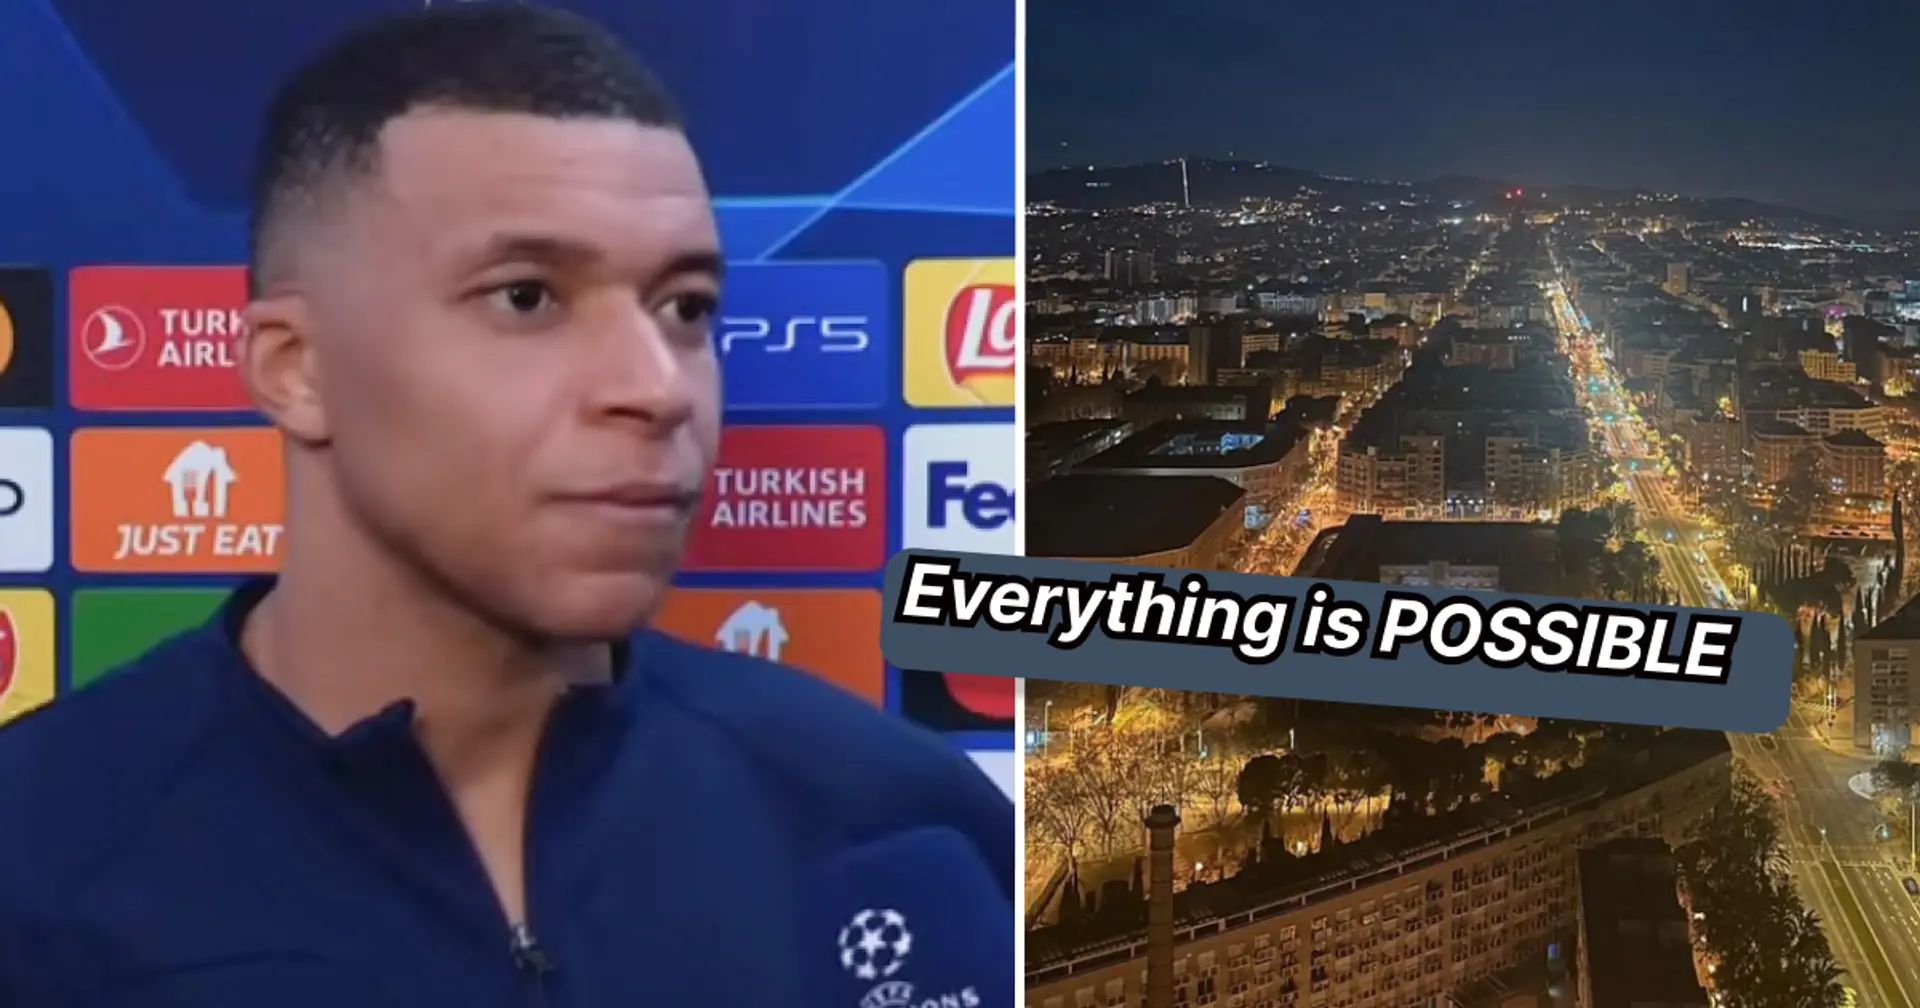 Mbappe posts about Barcelona – Blaugrana fans are hopeful